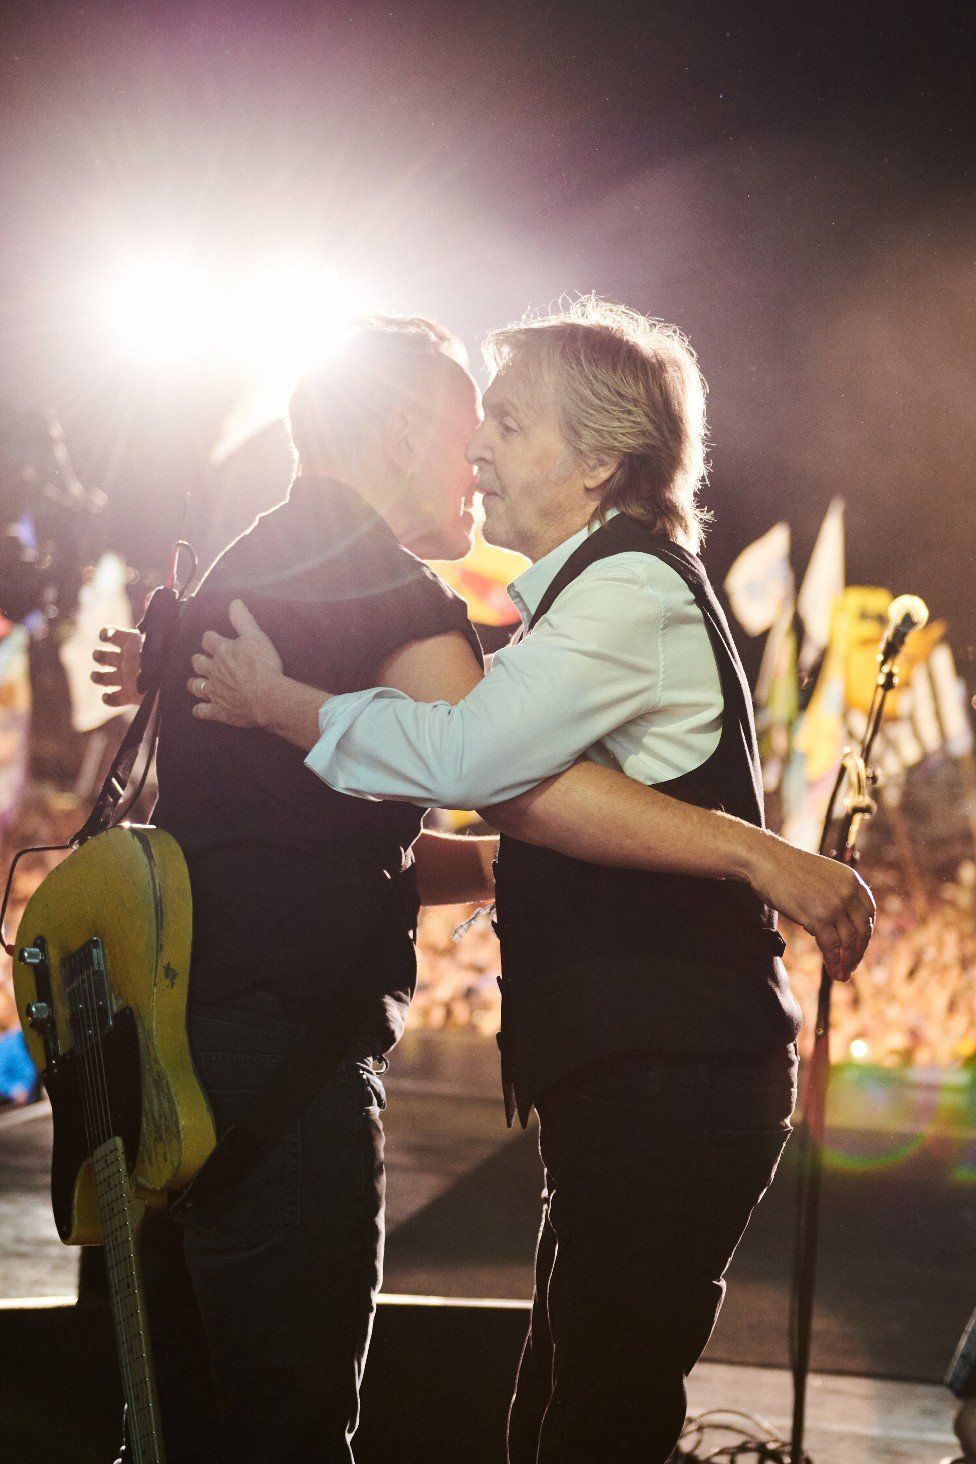 Bruce Springsteen and Paul McCartney on stage